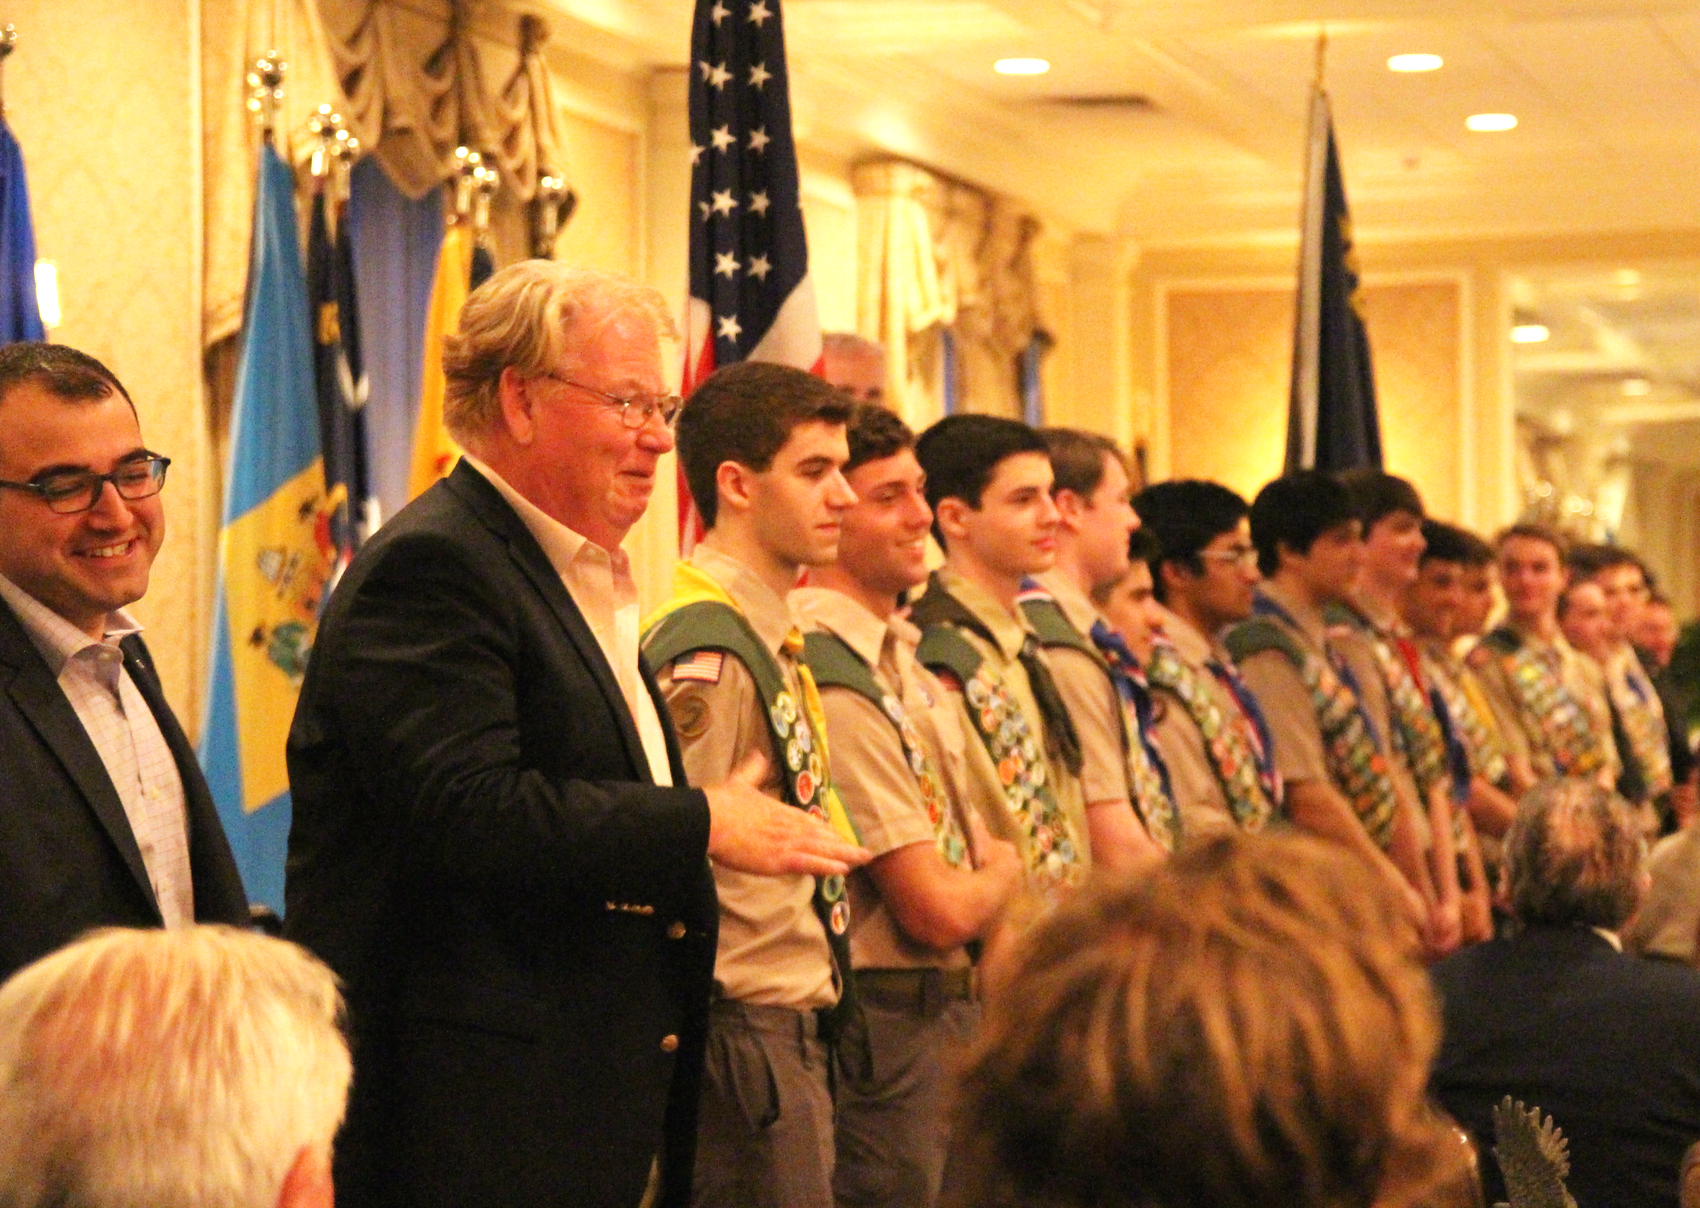 Eagle Scout Recognition Dinner and Gathering of Eagles. June 5, 2019 Photo: Leslie Yager